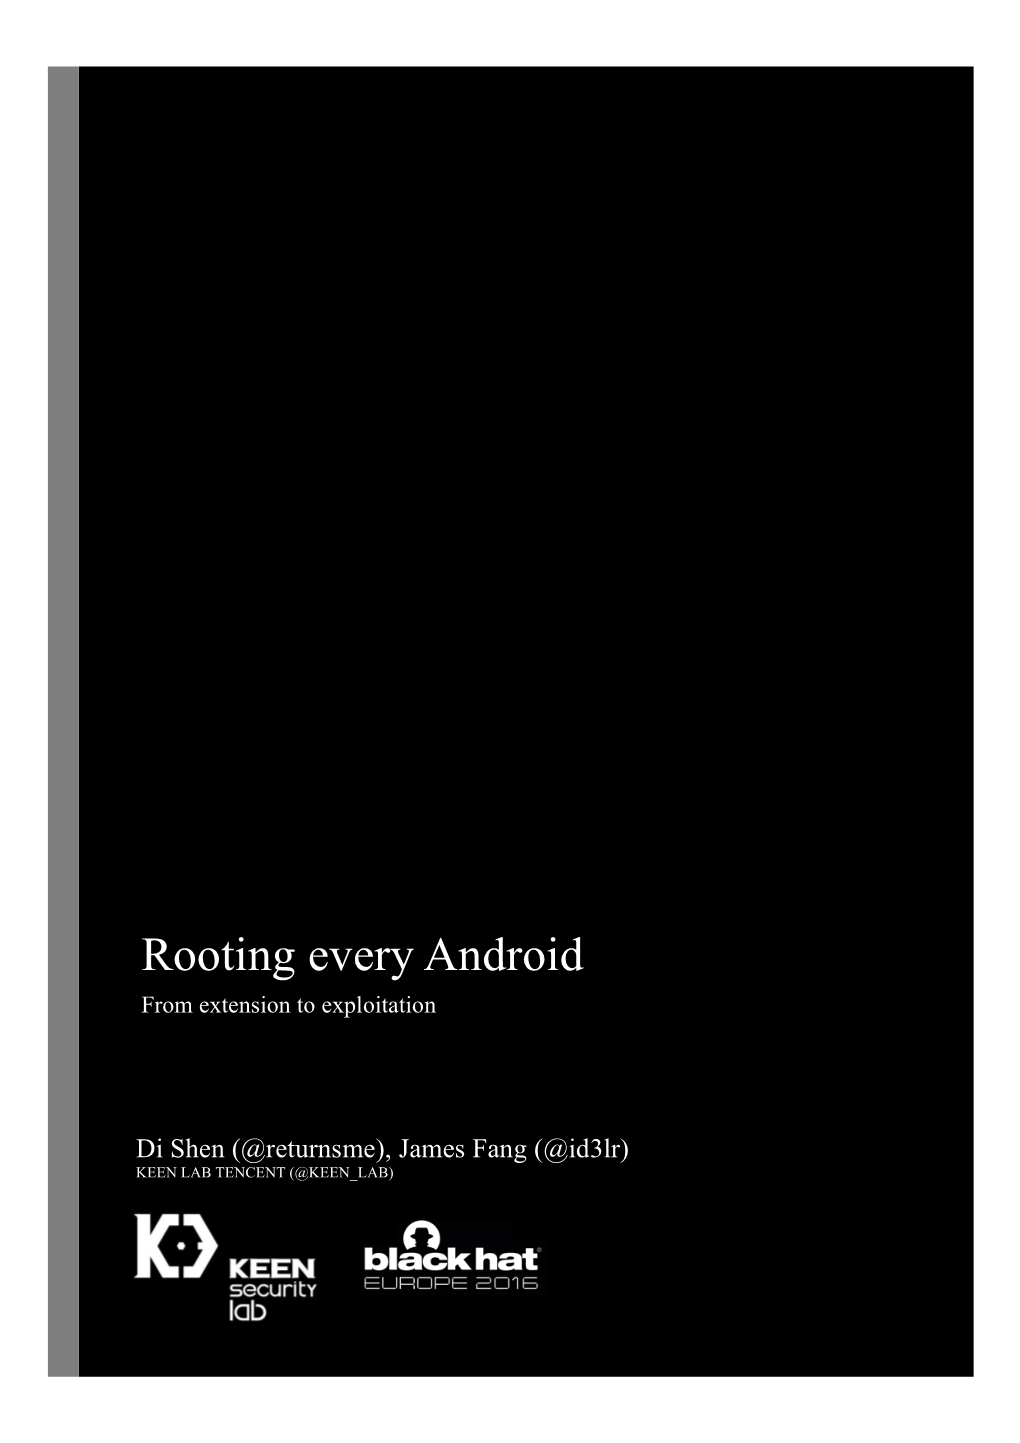 Rooting Every Android from Extension to Exploitation